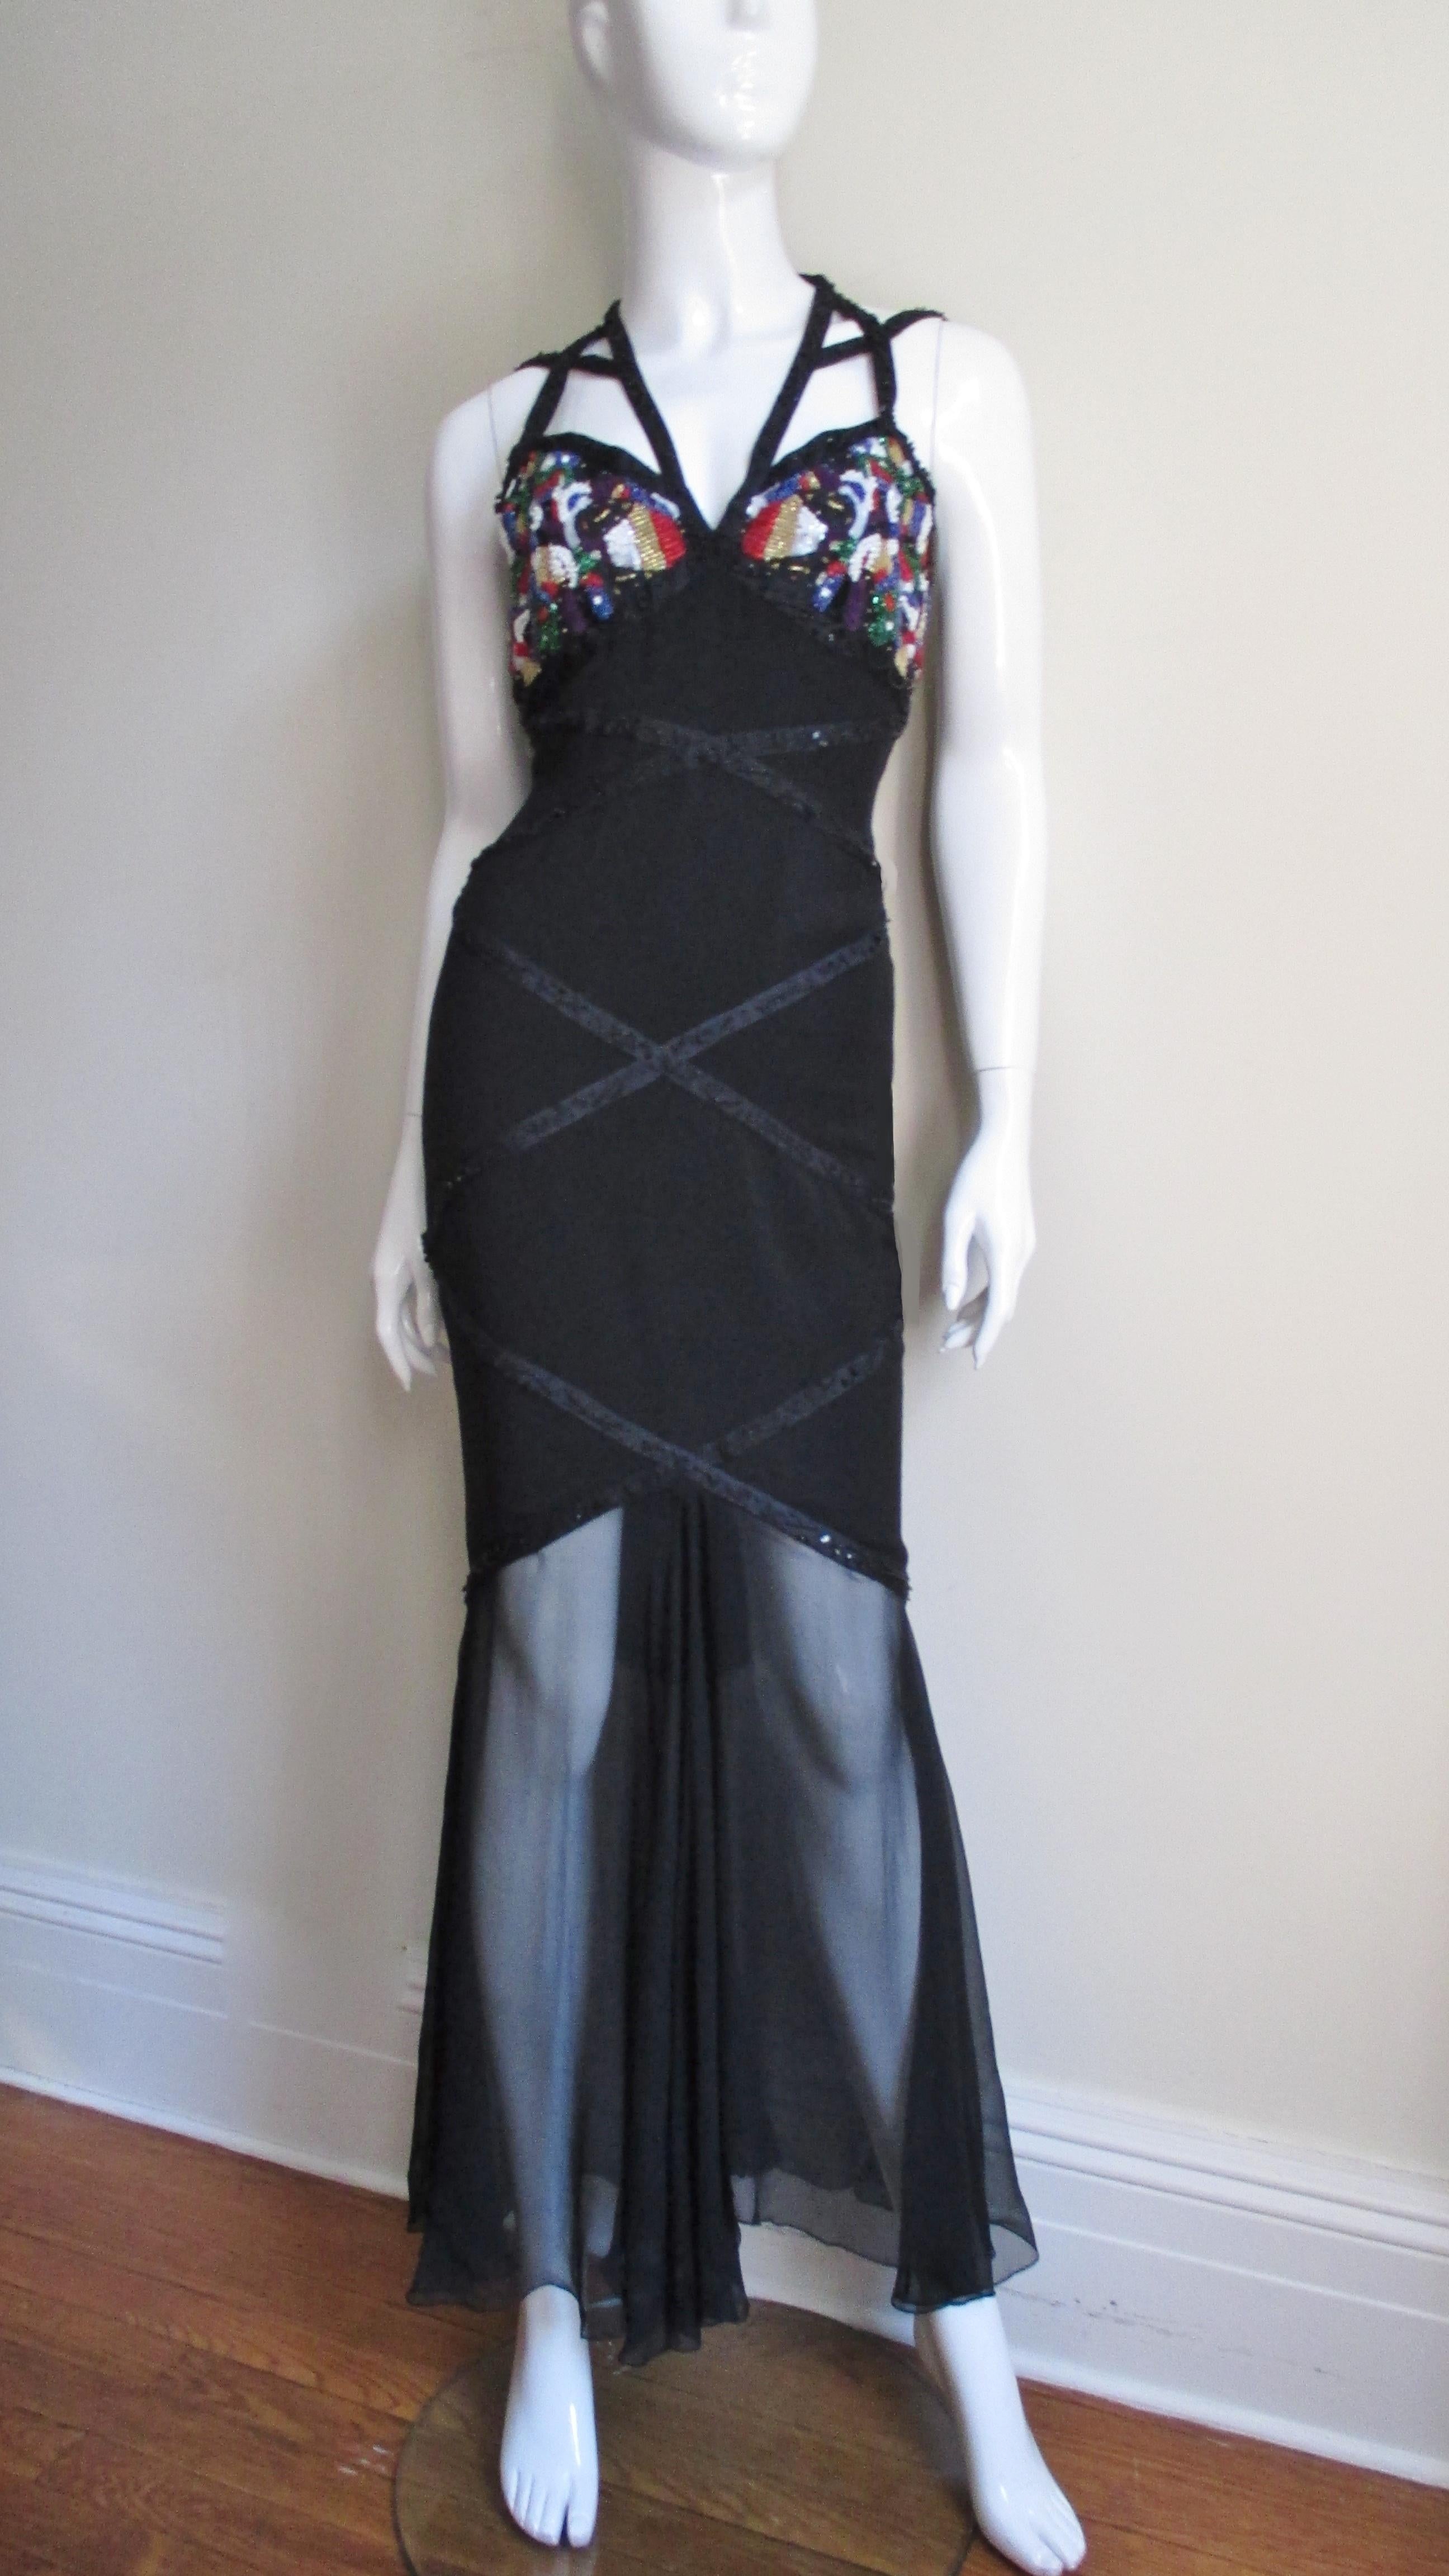 A fabulous rich black silk gown from Karl Lagerfeld as worn by Helena Christensen for his SS 1993 ad campaign. It has a colorful intricately beaded bust and double front black glass bead enhanced shoulder straps wrapping around the neck and 4 staps